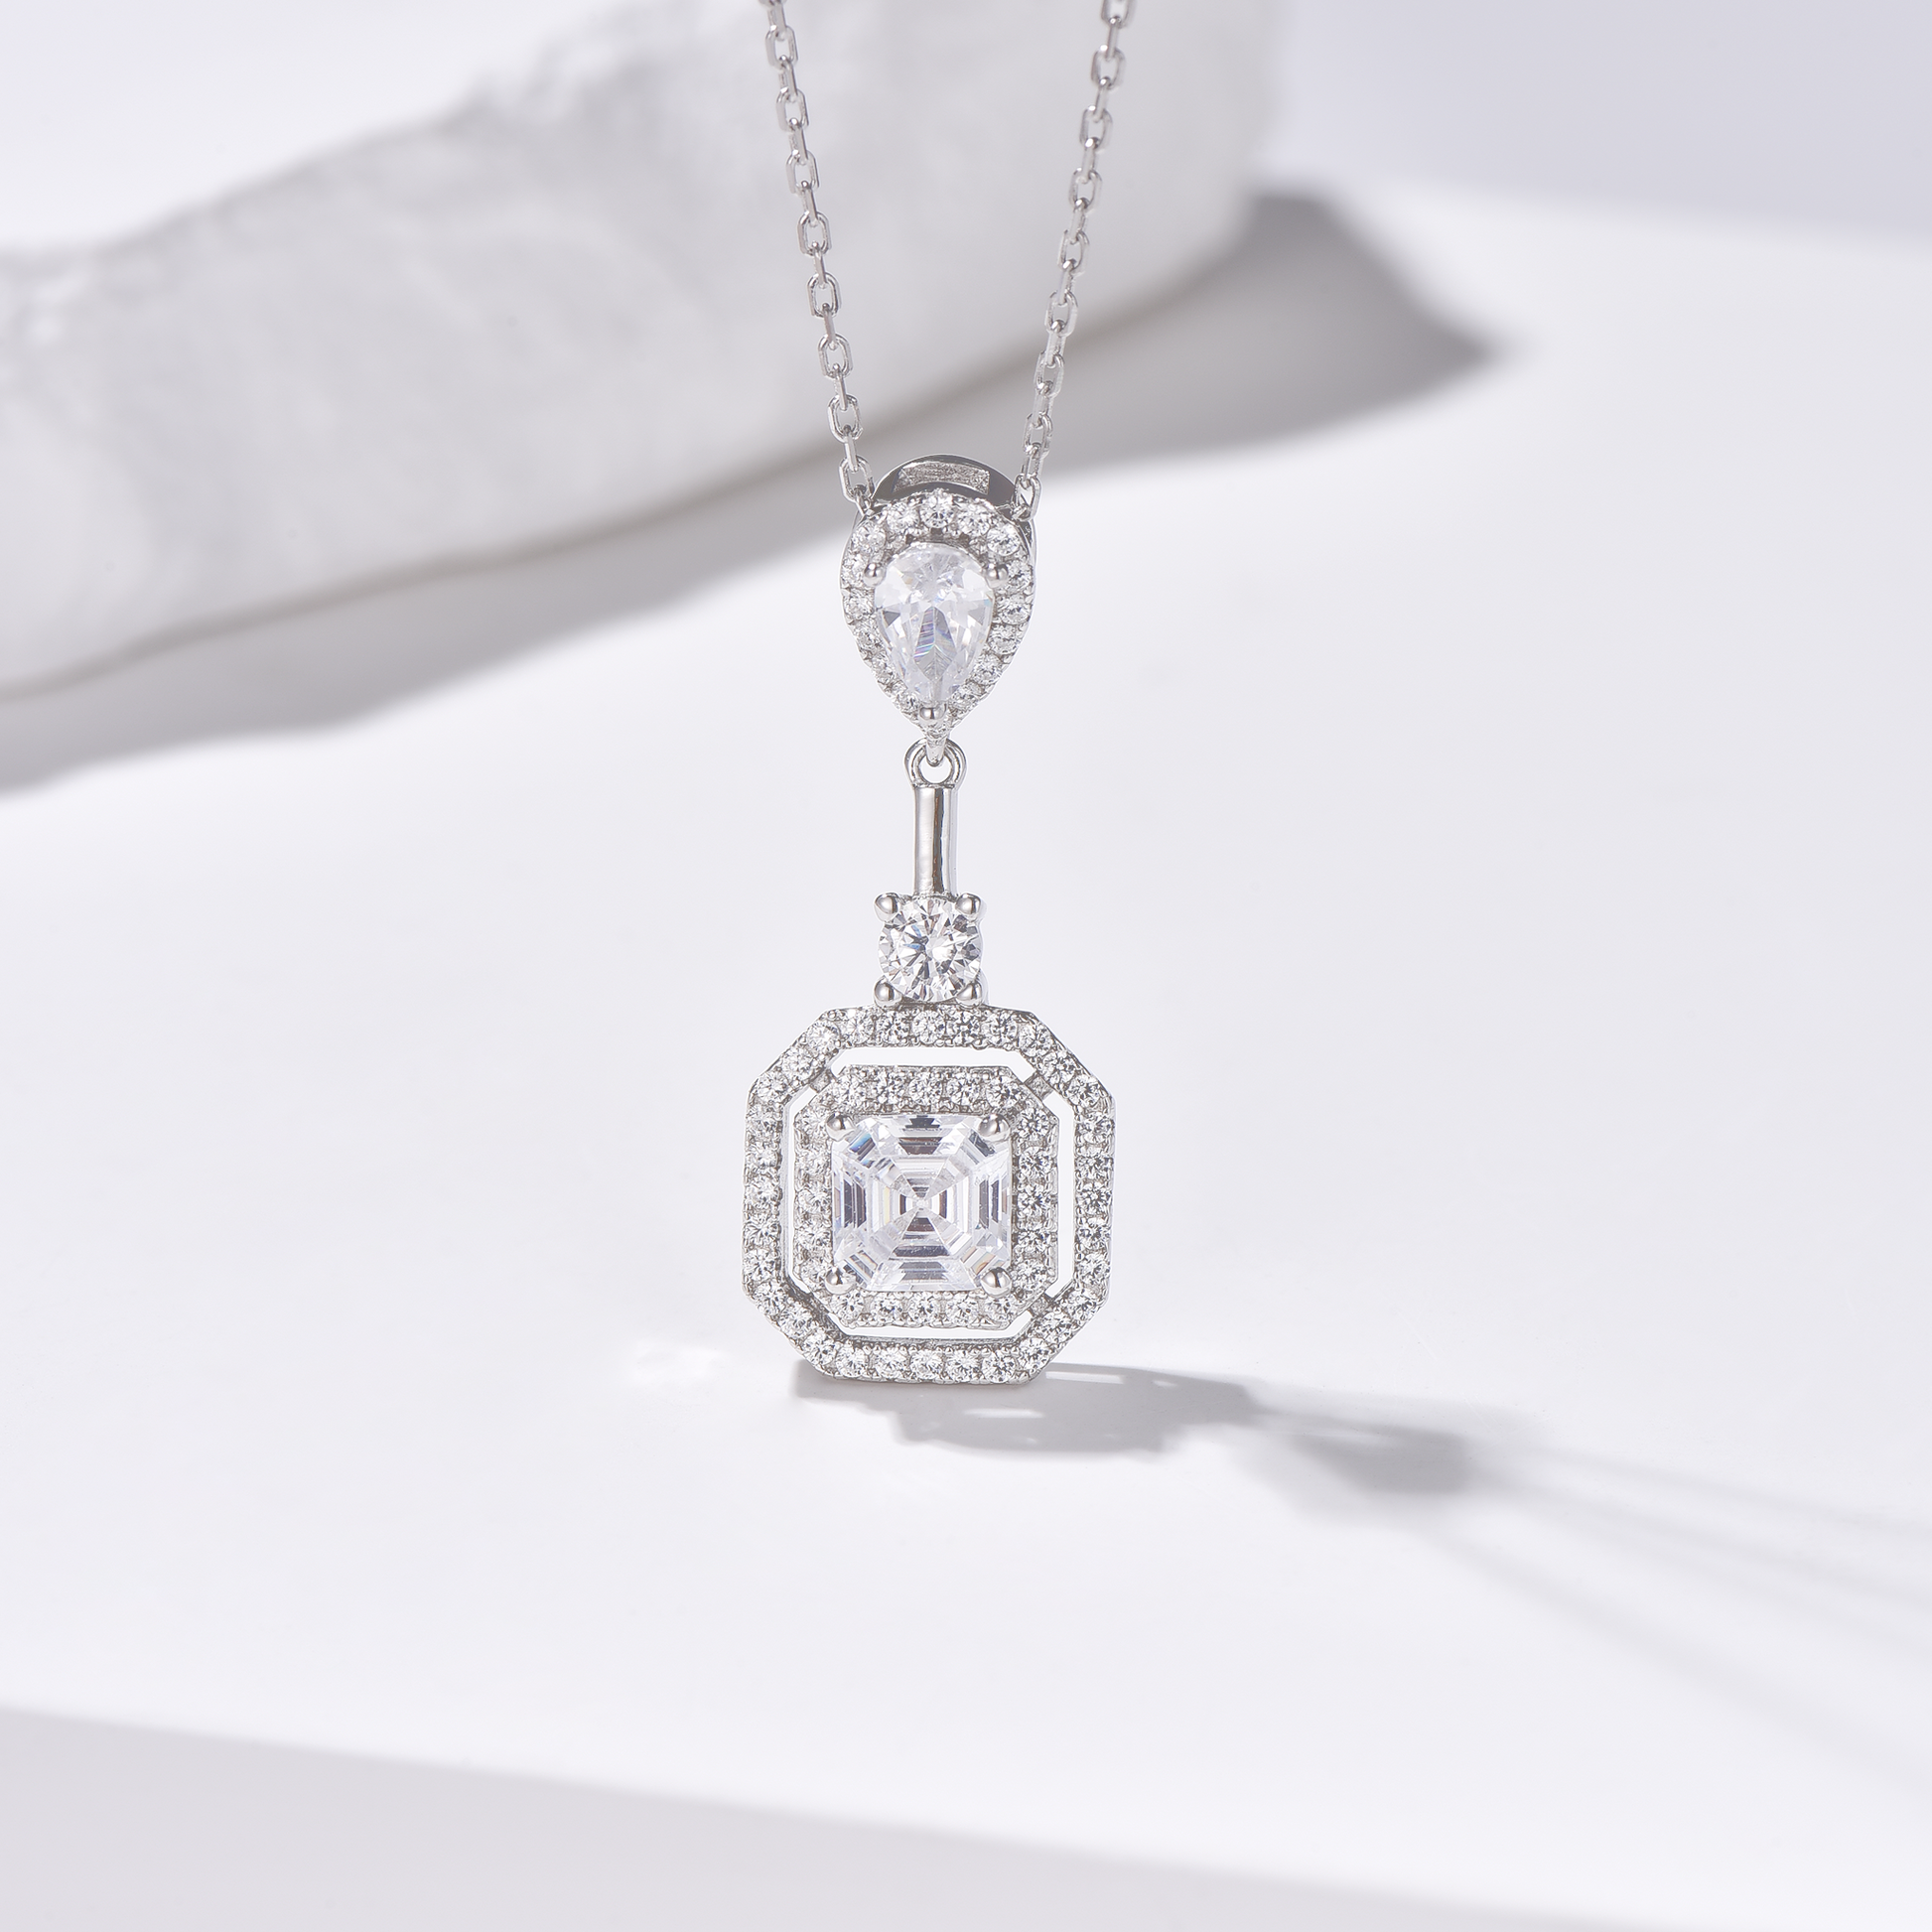 3 Stone Pendants Necklace - Halo Pear Round Asscher Cut High Carbon Diamonds - Rhodium Plated Sterling Silver - Necklace - ONNNIII